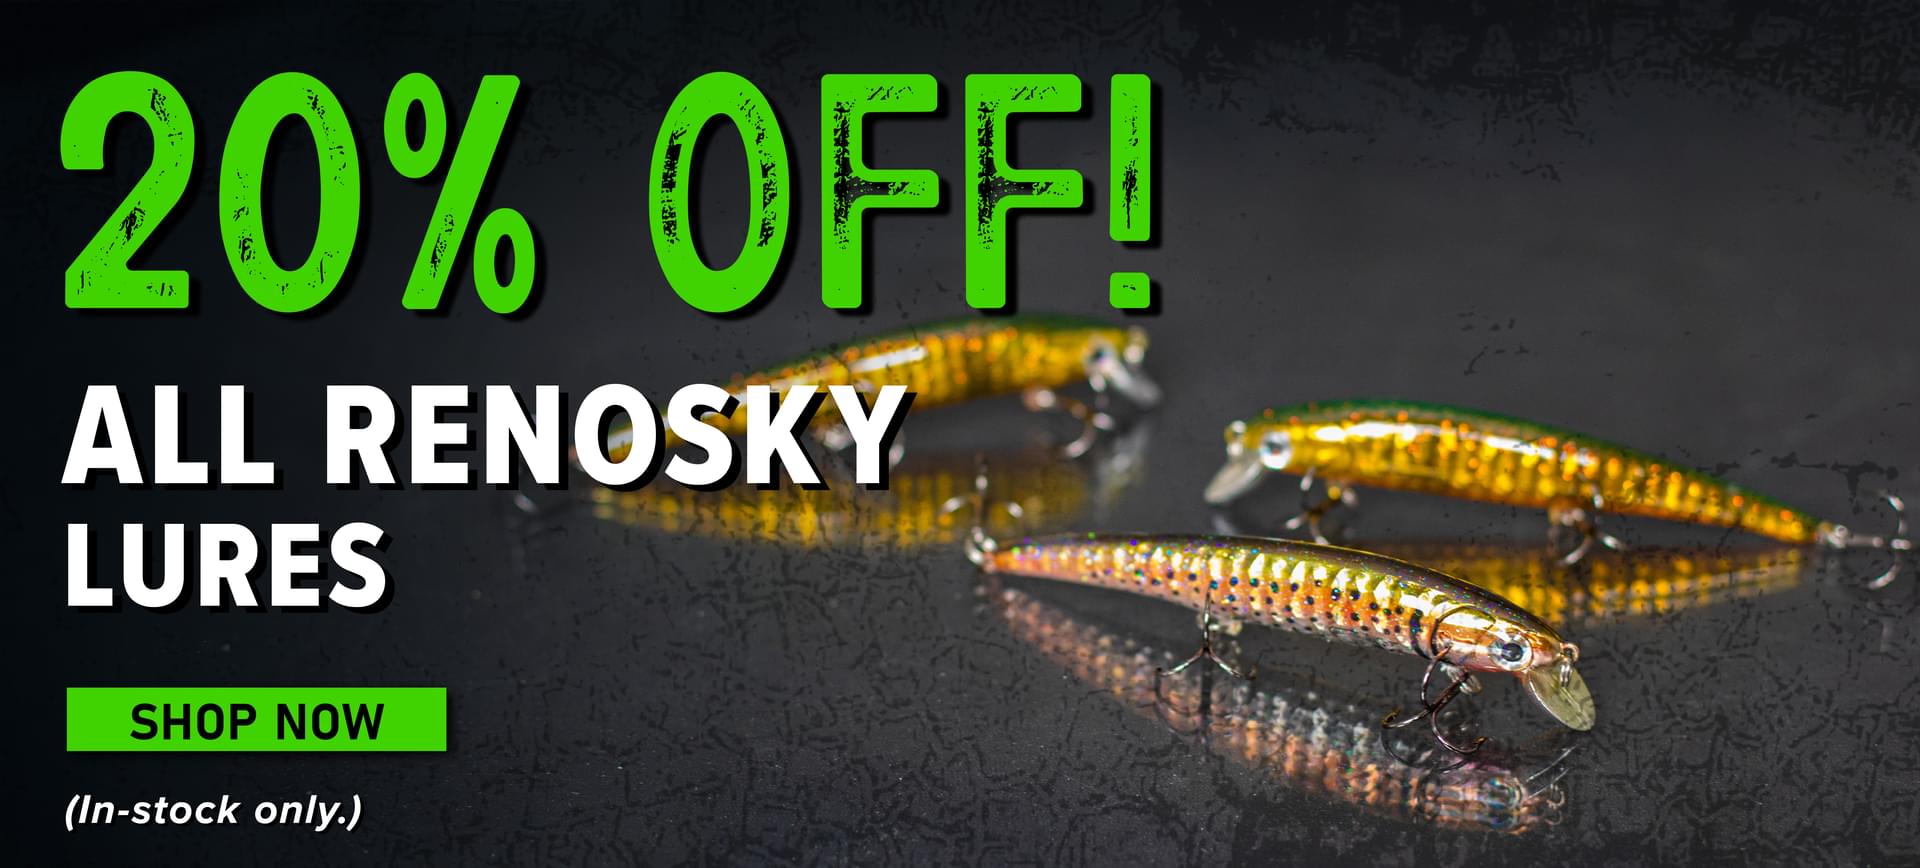 20% Off! All Renosky Lures Shop Now (In-stock only.)  . ALL RENOSKY LURES s In-stock only. 